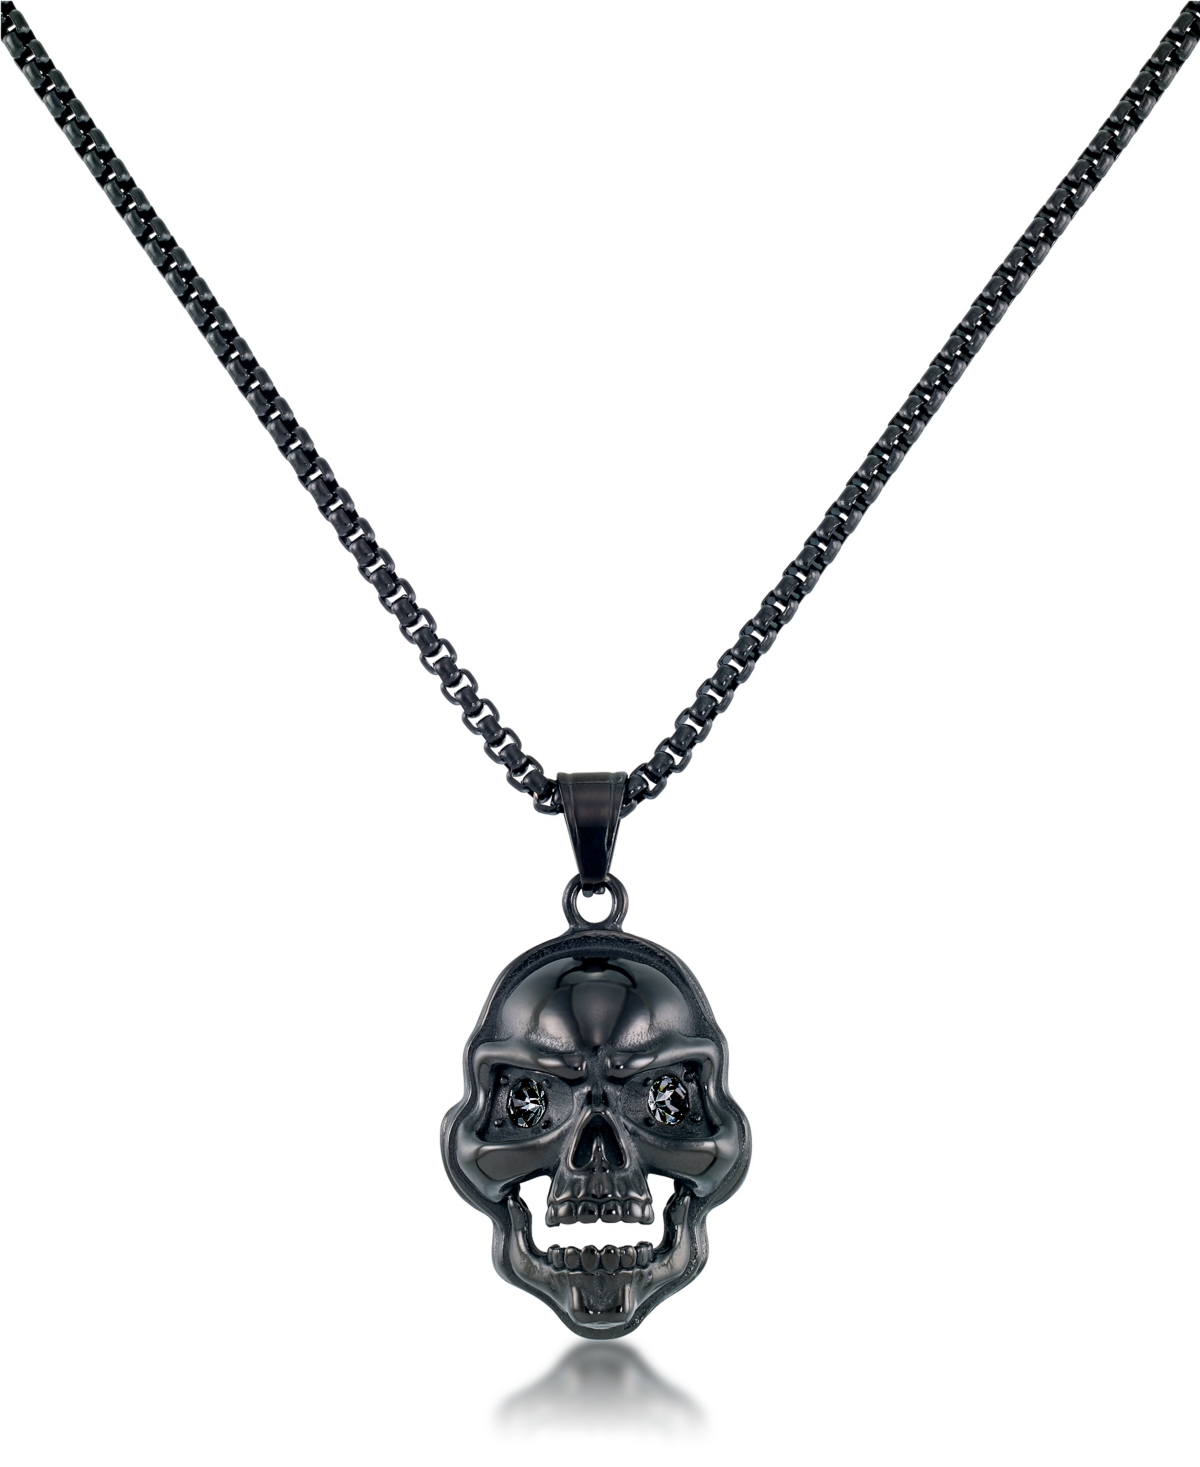 Andrew Charles by Andy Hilfiger Men's Cubic Zirconia Signature Skull 24" Pendant Necklace in Black Ion-Plated Stainless Steel (Also available in Gold-Tone Ion-Plated Stainless Steel)